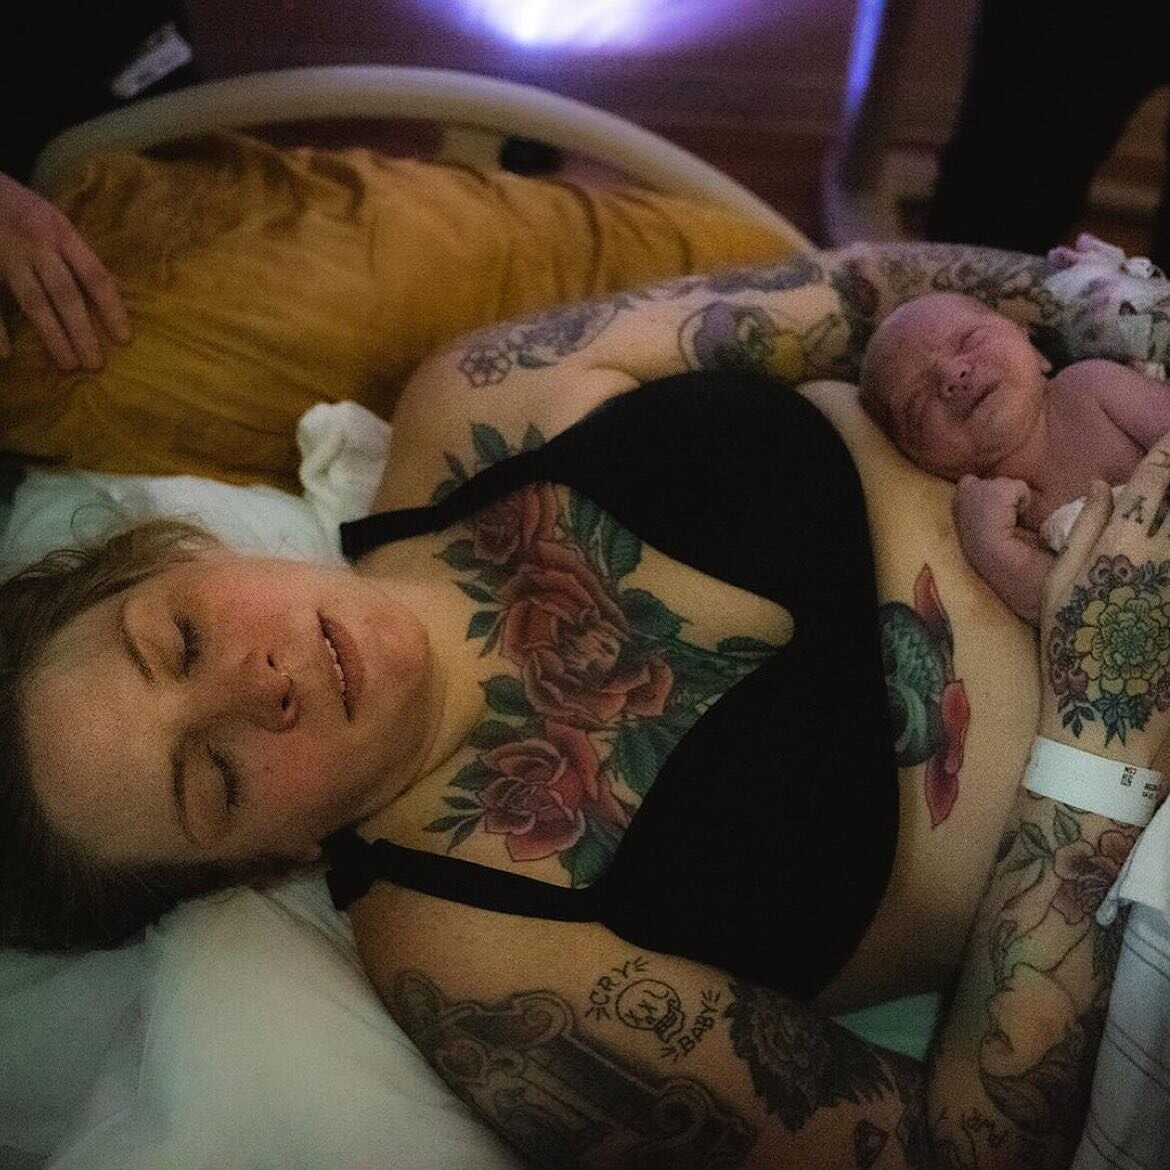 When you realize you freakin did it!
&bull;
Repost from @danabtatum, MyBirth doula and birth photographer 
&bull;
&ldquo;When you realize you freakin did it! So thankful to have captured some of the magic that was present during this powerful birth.
